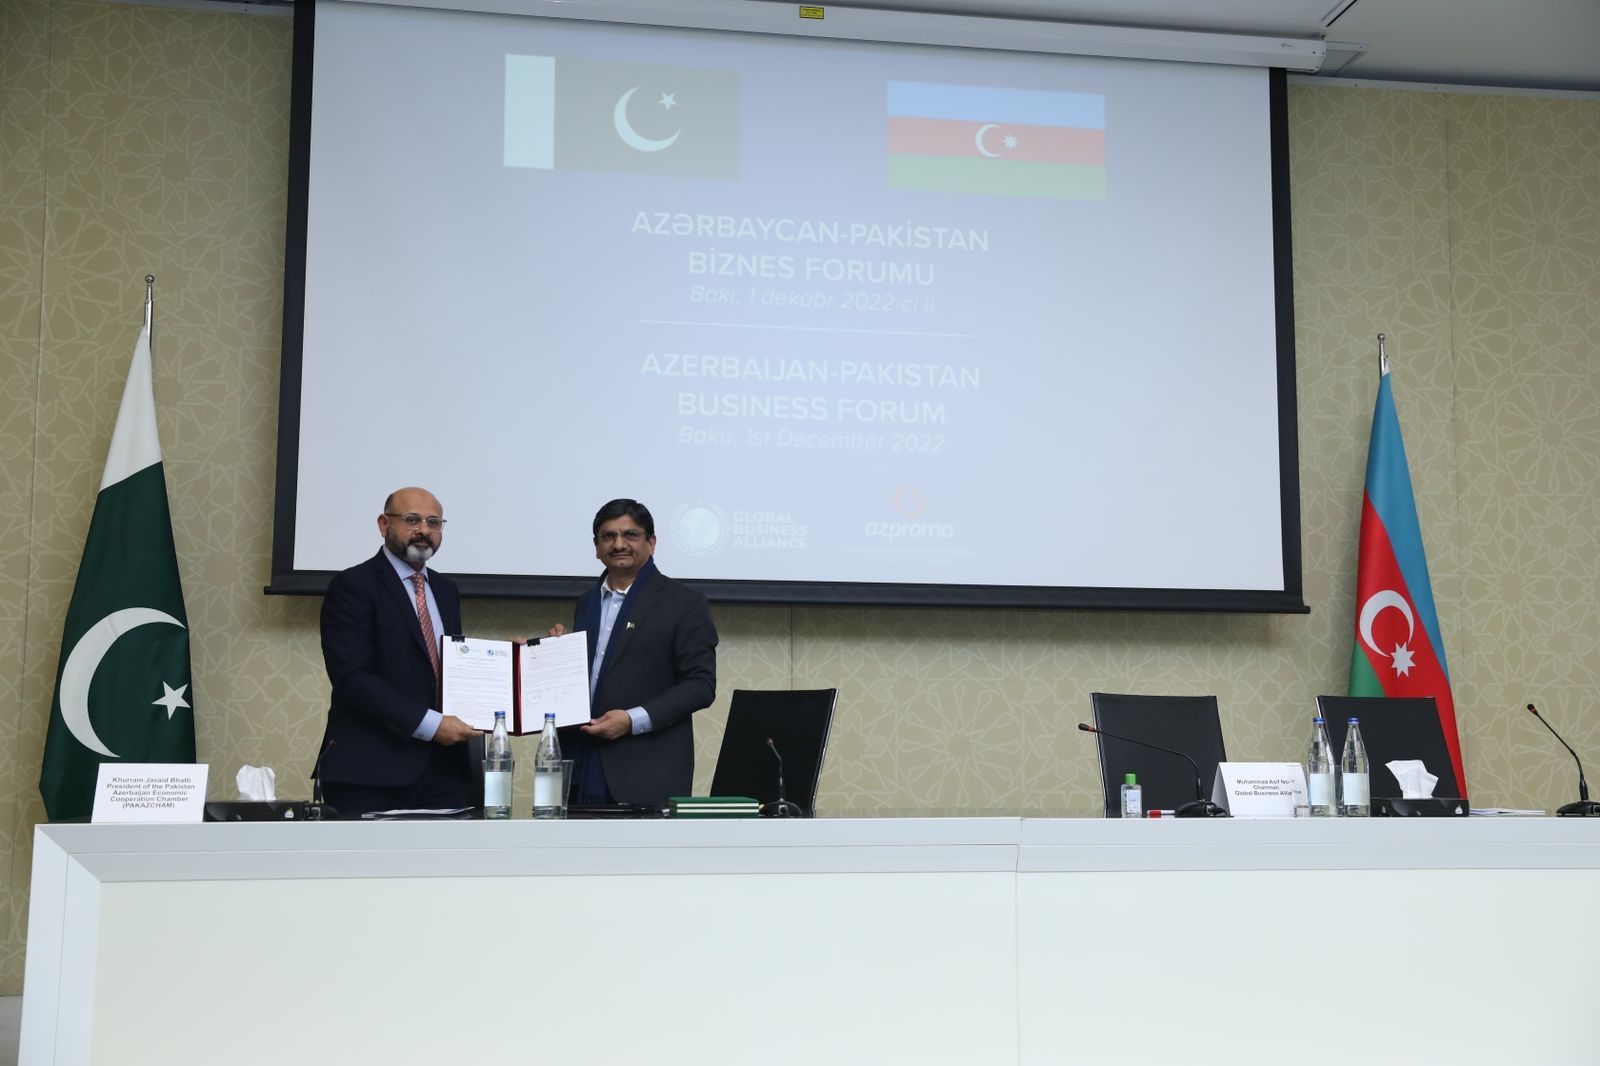 Chairpersons of GBA and PAKAZCHAM signed an agreement.